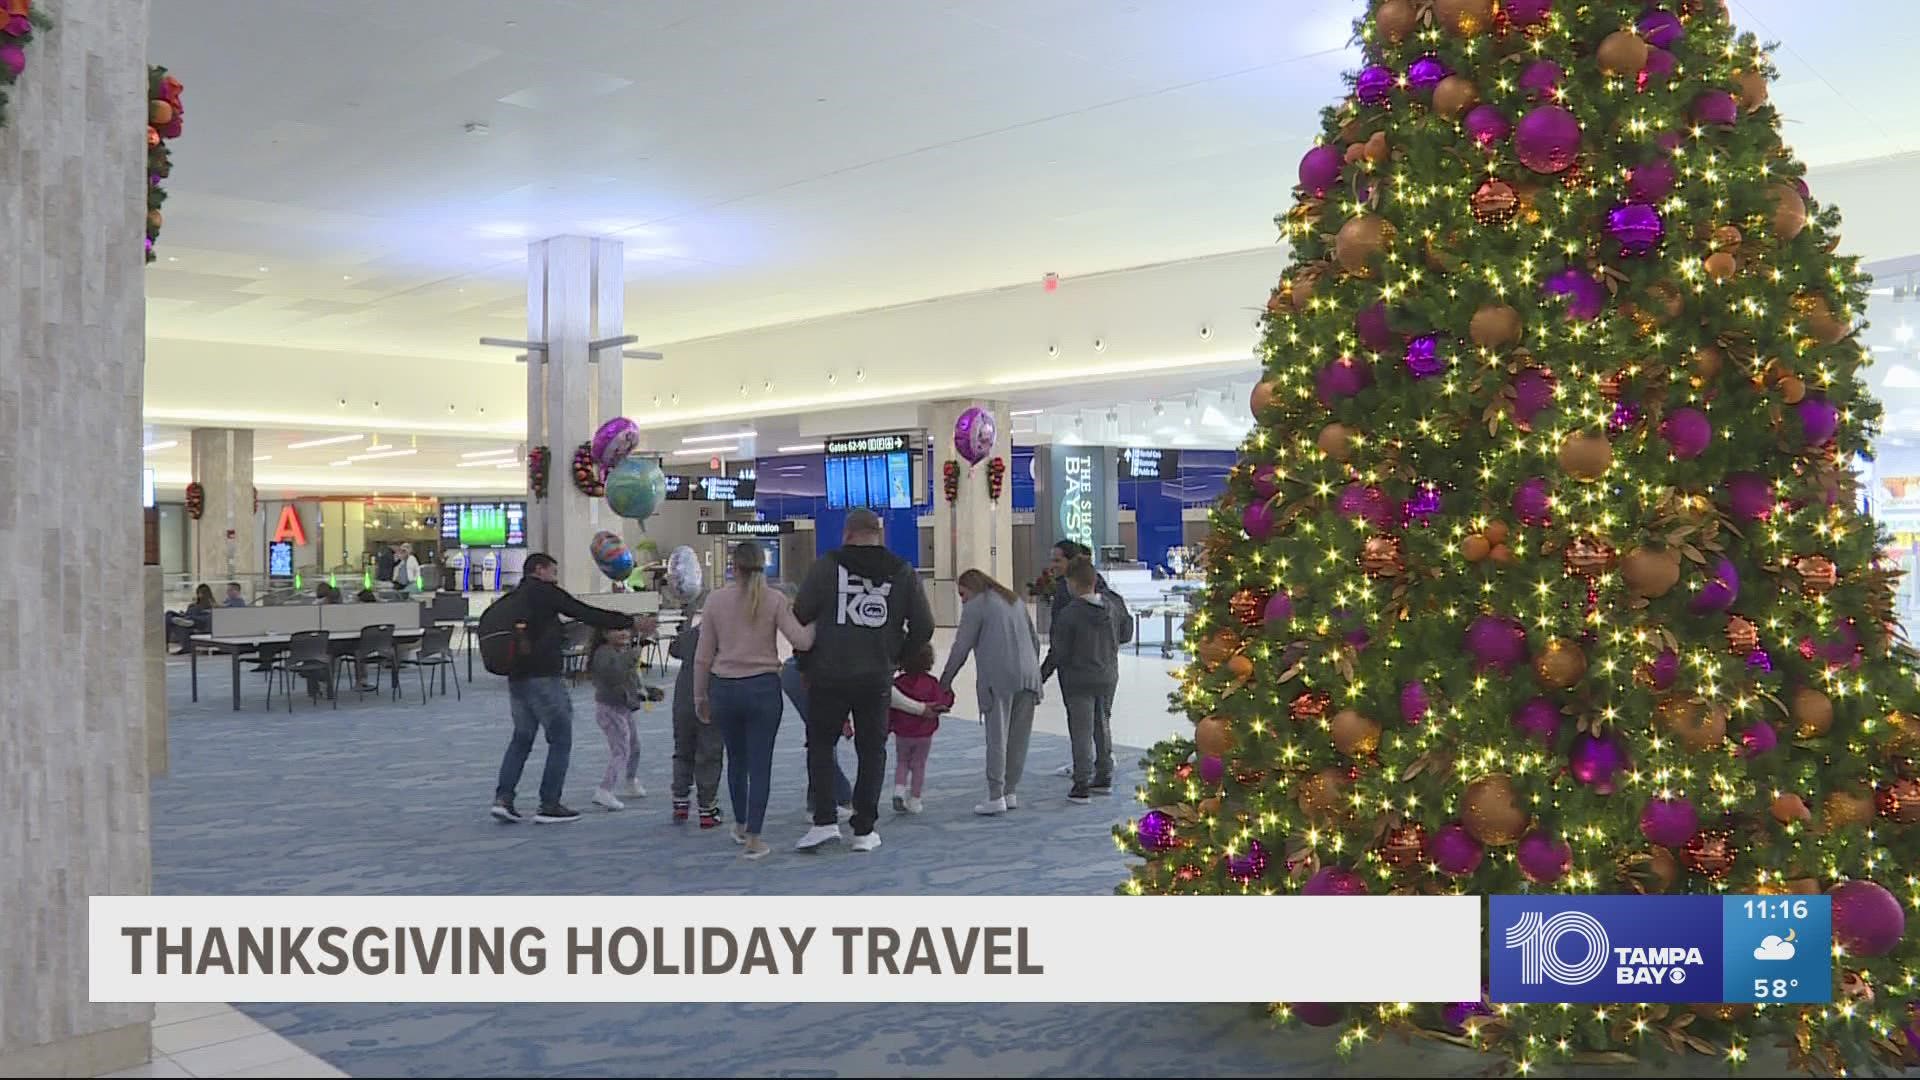 Tampa International Airport expects to see an average of approximately 70,000 travelers per day over the Thanksgiving stretch.